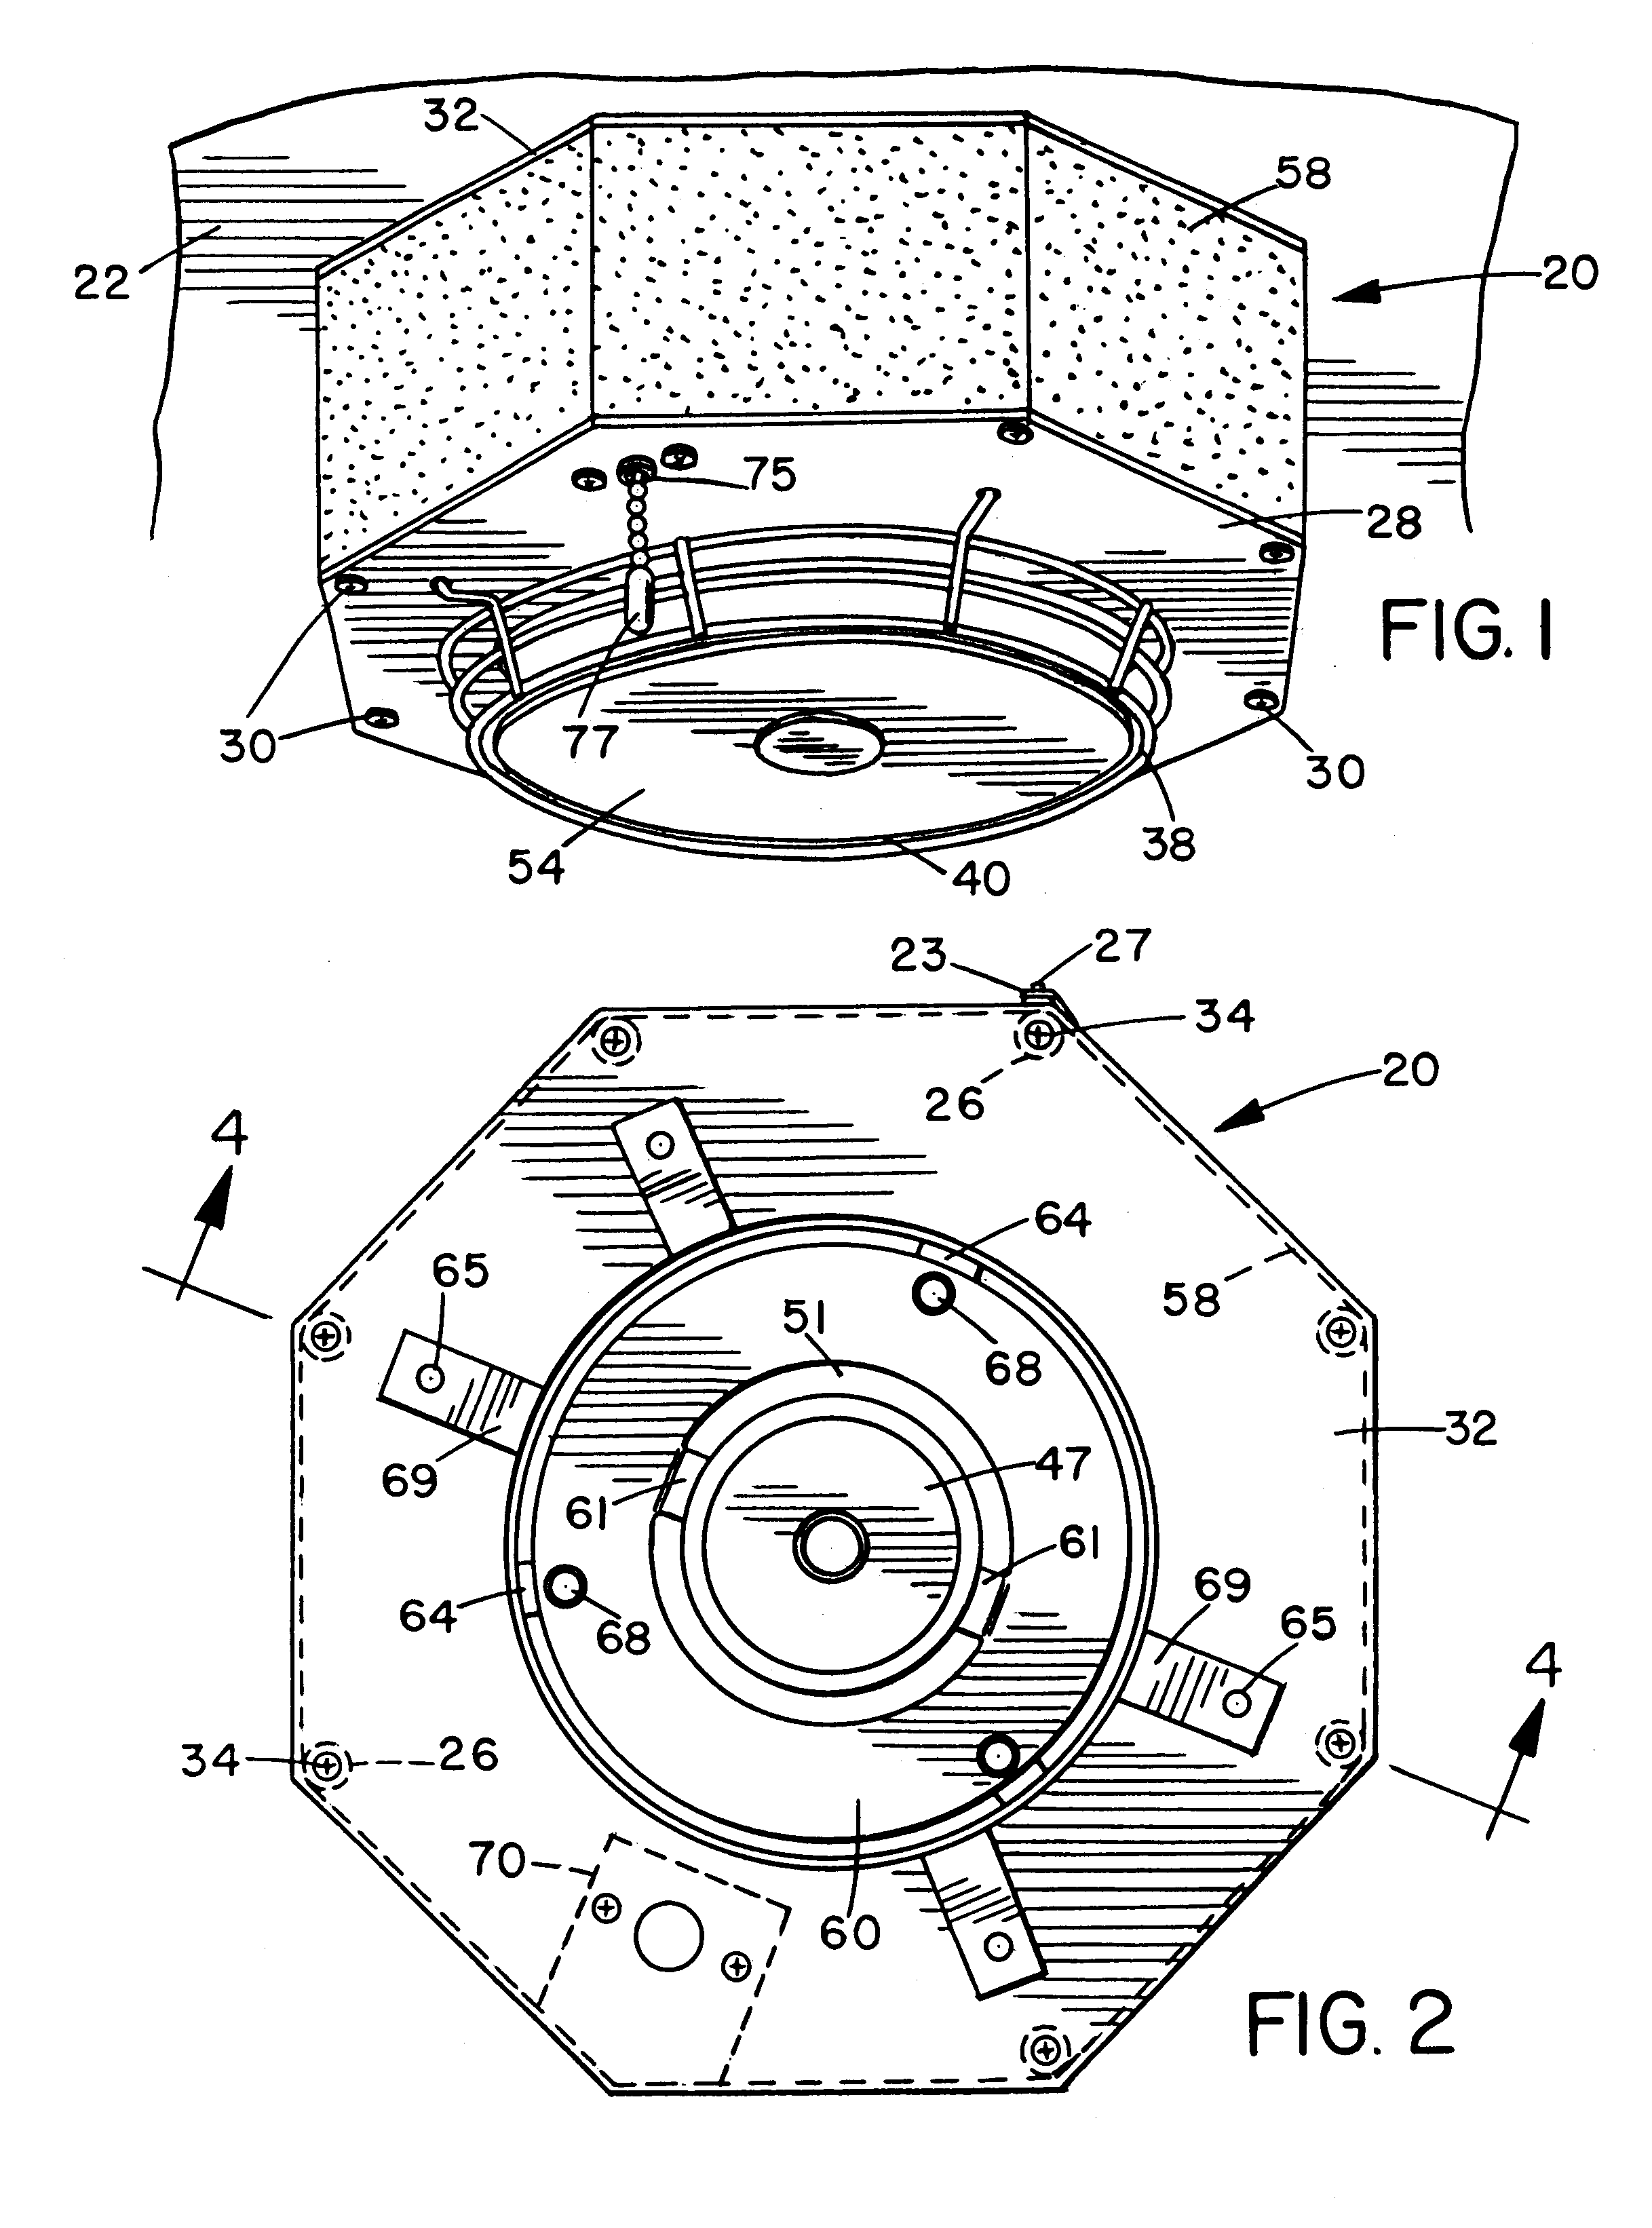 Recirculating air mixer and fan with lateral air flow